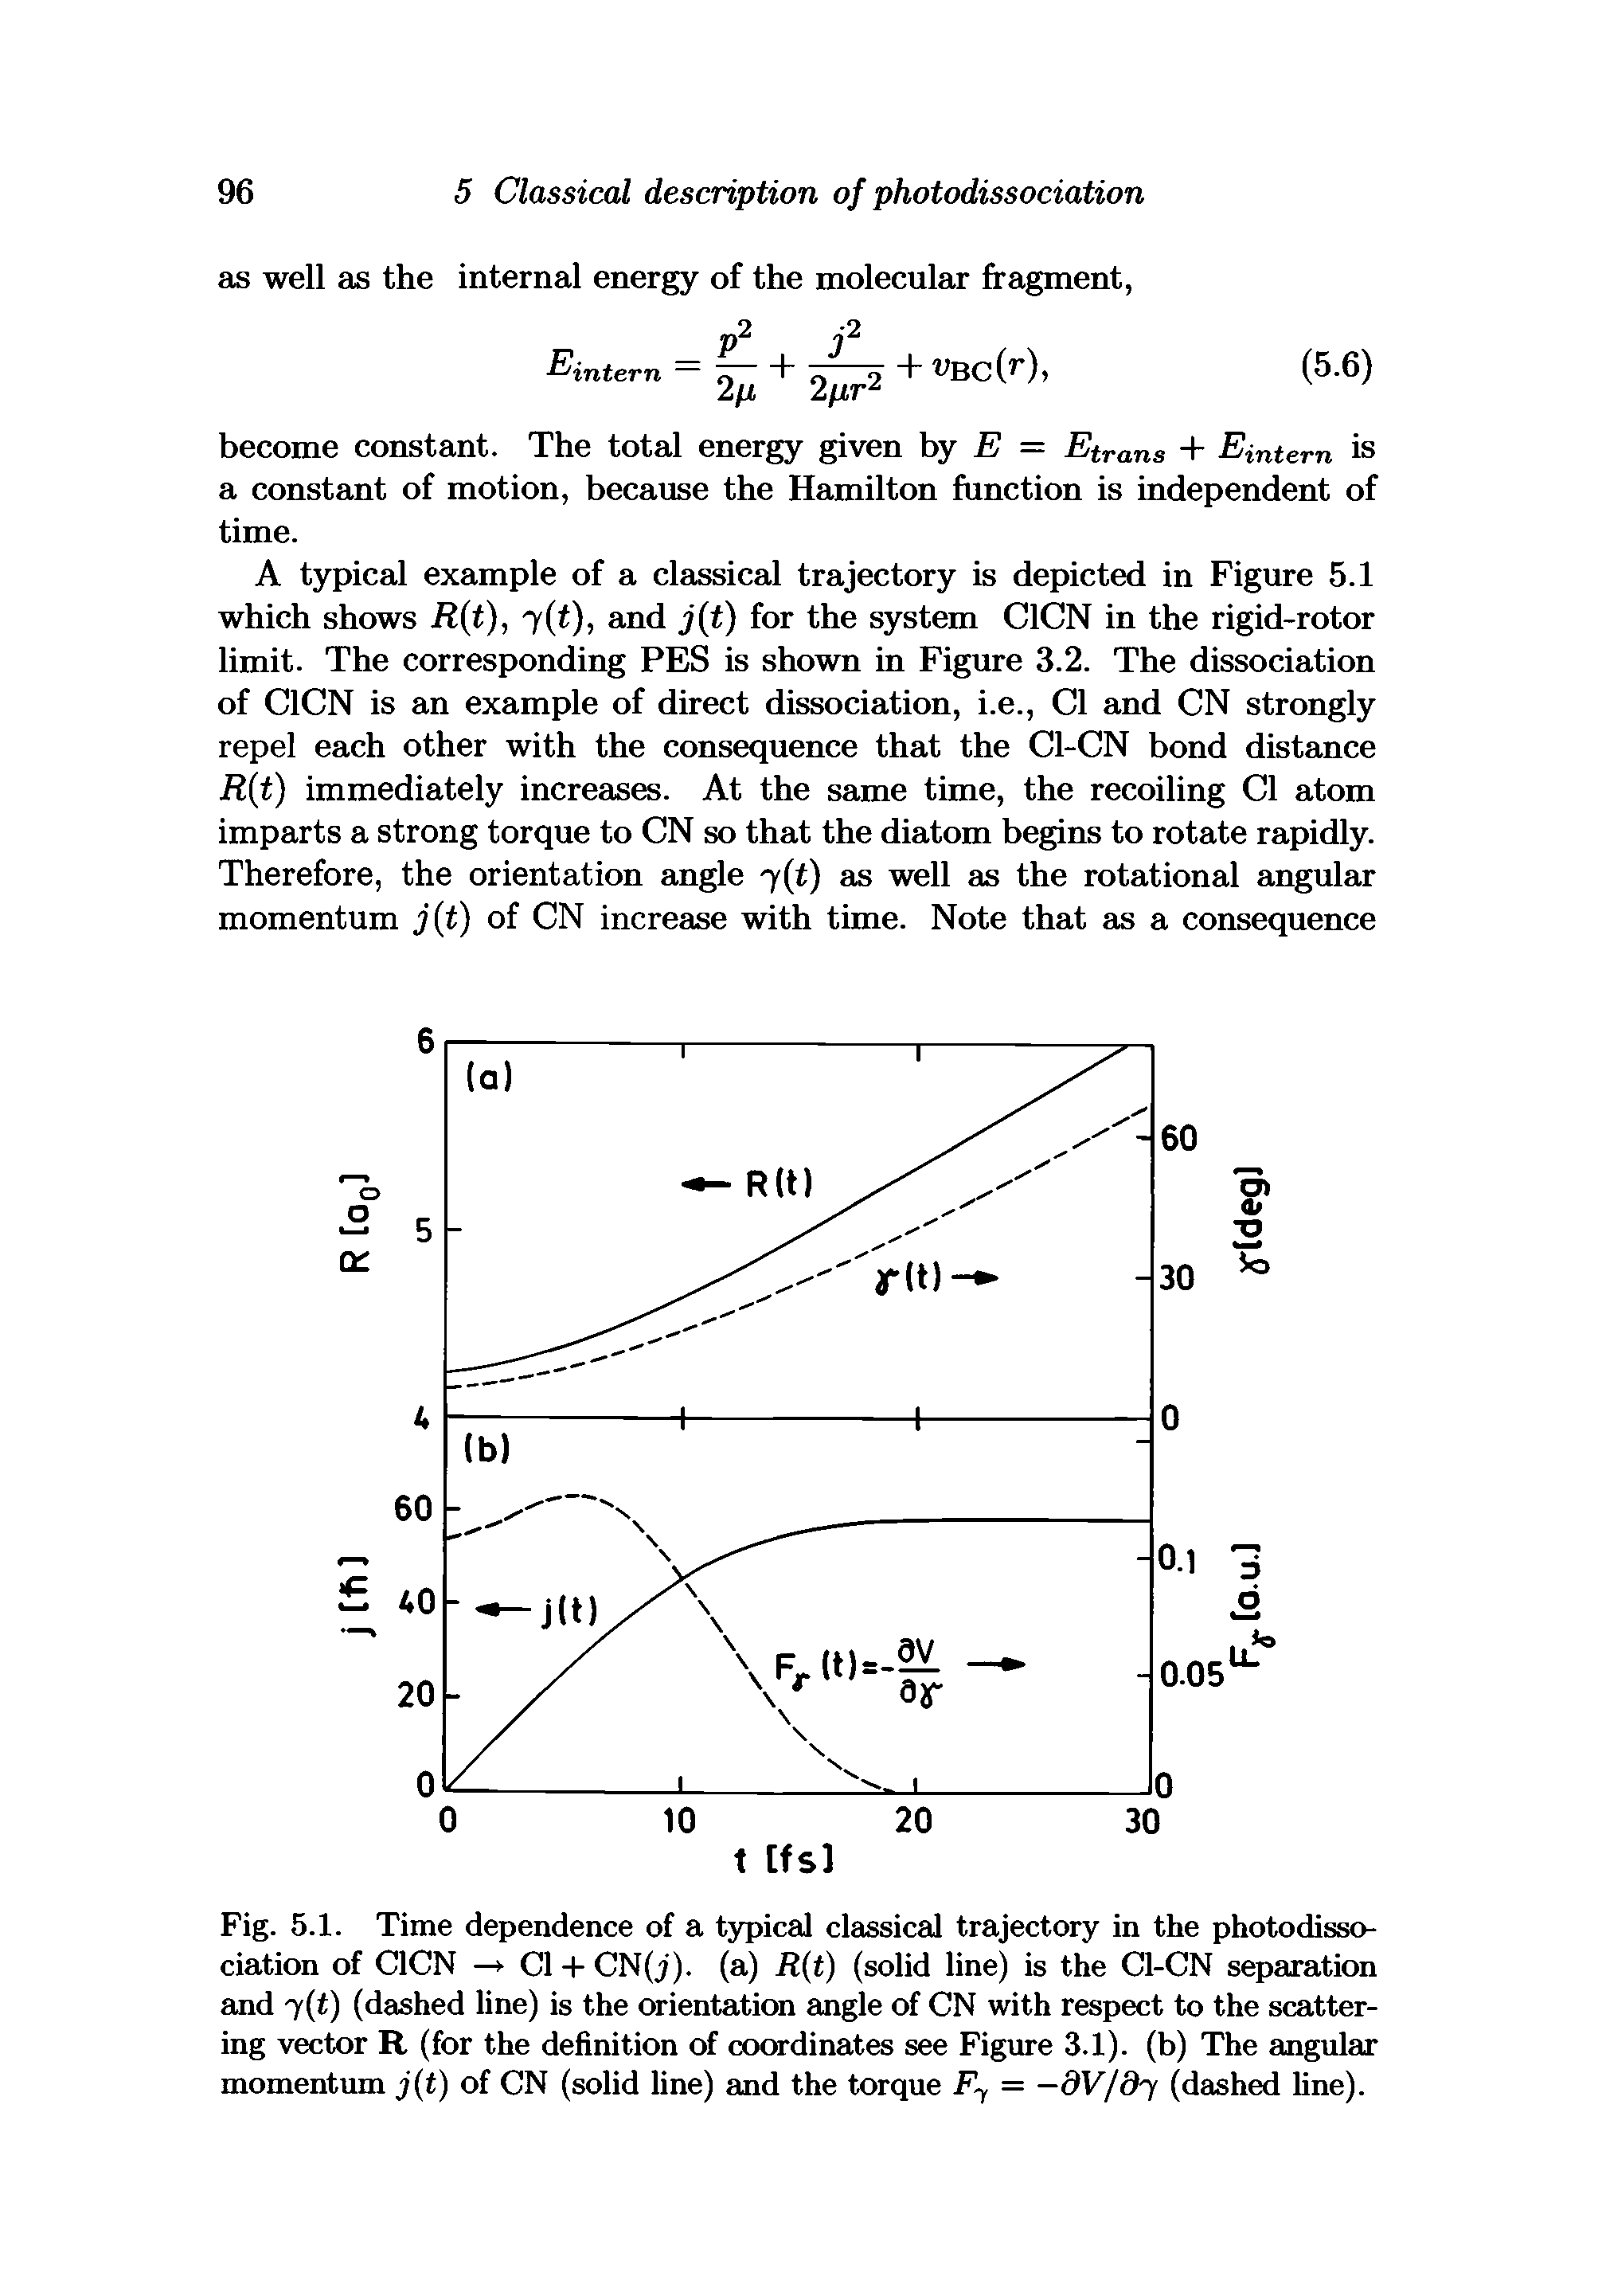 Fig. 5.1. Time dependence of a typical classical trajectory in the photodissociation of C1CN — Cl 4- CN(j). (a) R(t) (solid line) is the Cl-CN separation and 7(t) (dashed line) is the orientation angle of CN with respect to the scattering vector R (for the definition of coordinates see Figure 3.1). (b) The angular momentum j(t) of CN (solid line) and the torque F1 = -dV/dj (dashed line).